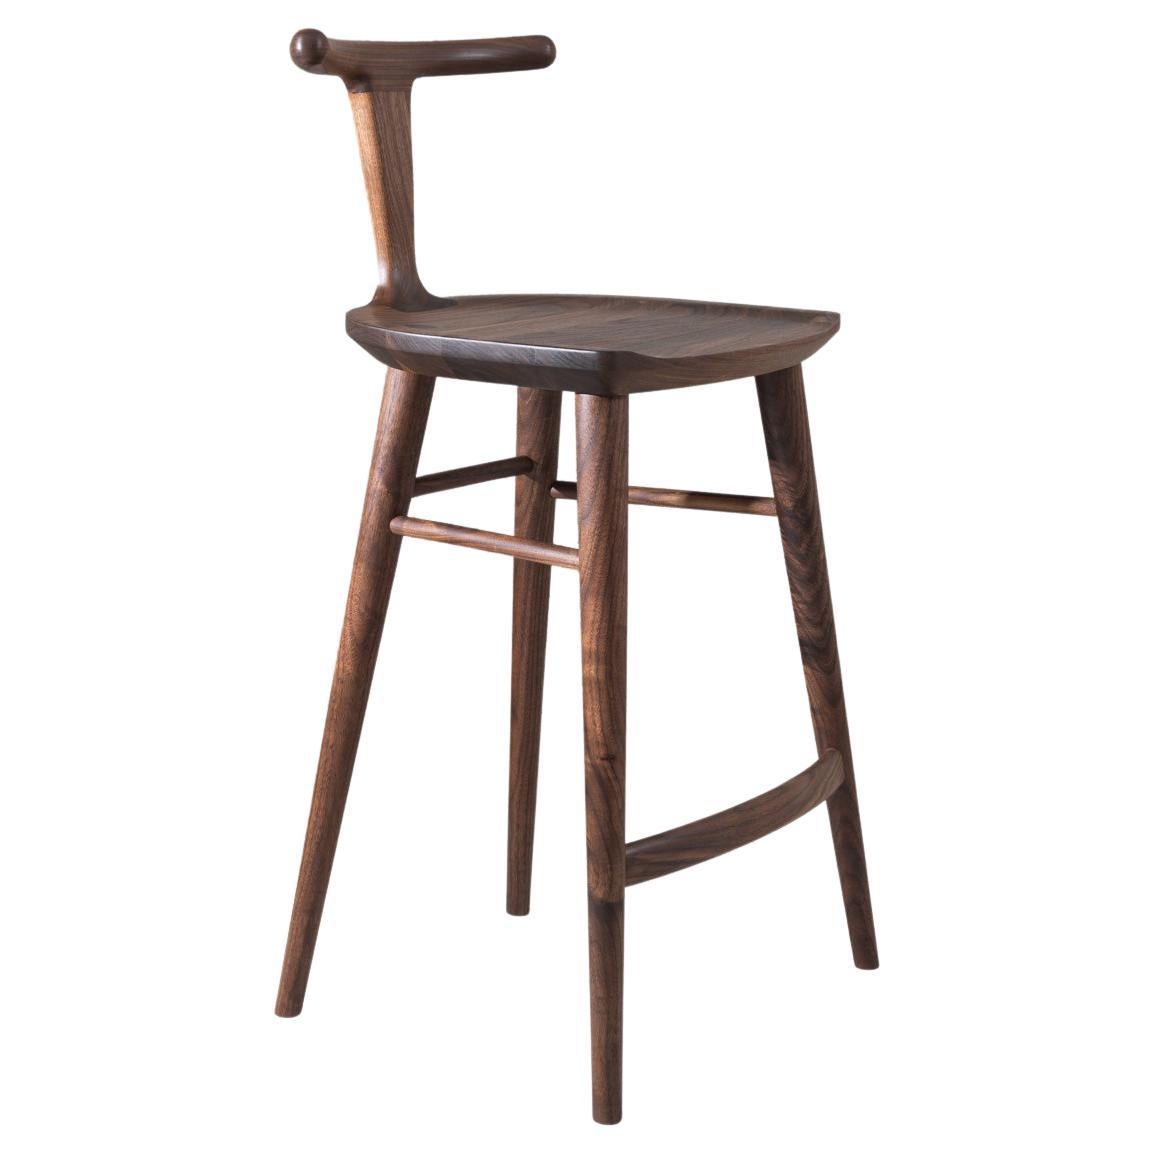 Oxbend Stool, Bar or Counter Seat in Walnut